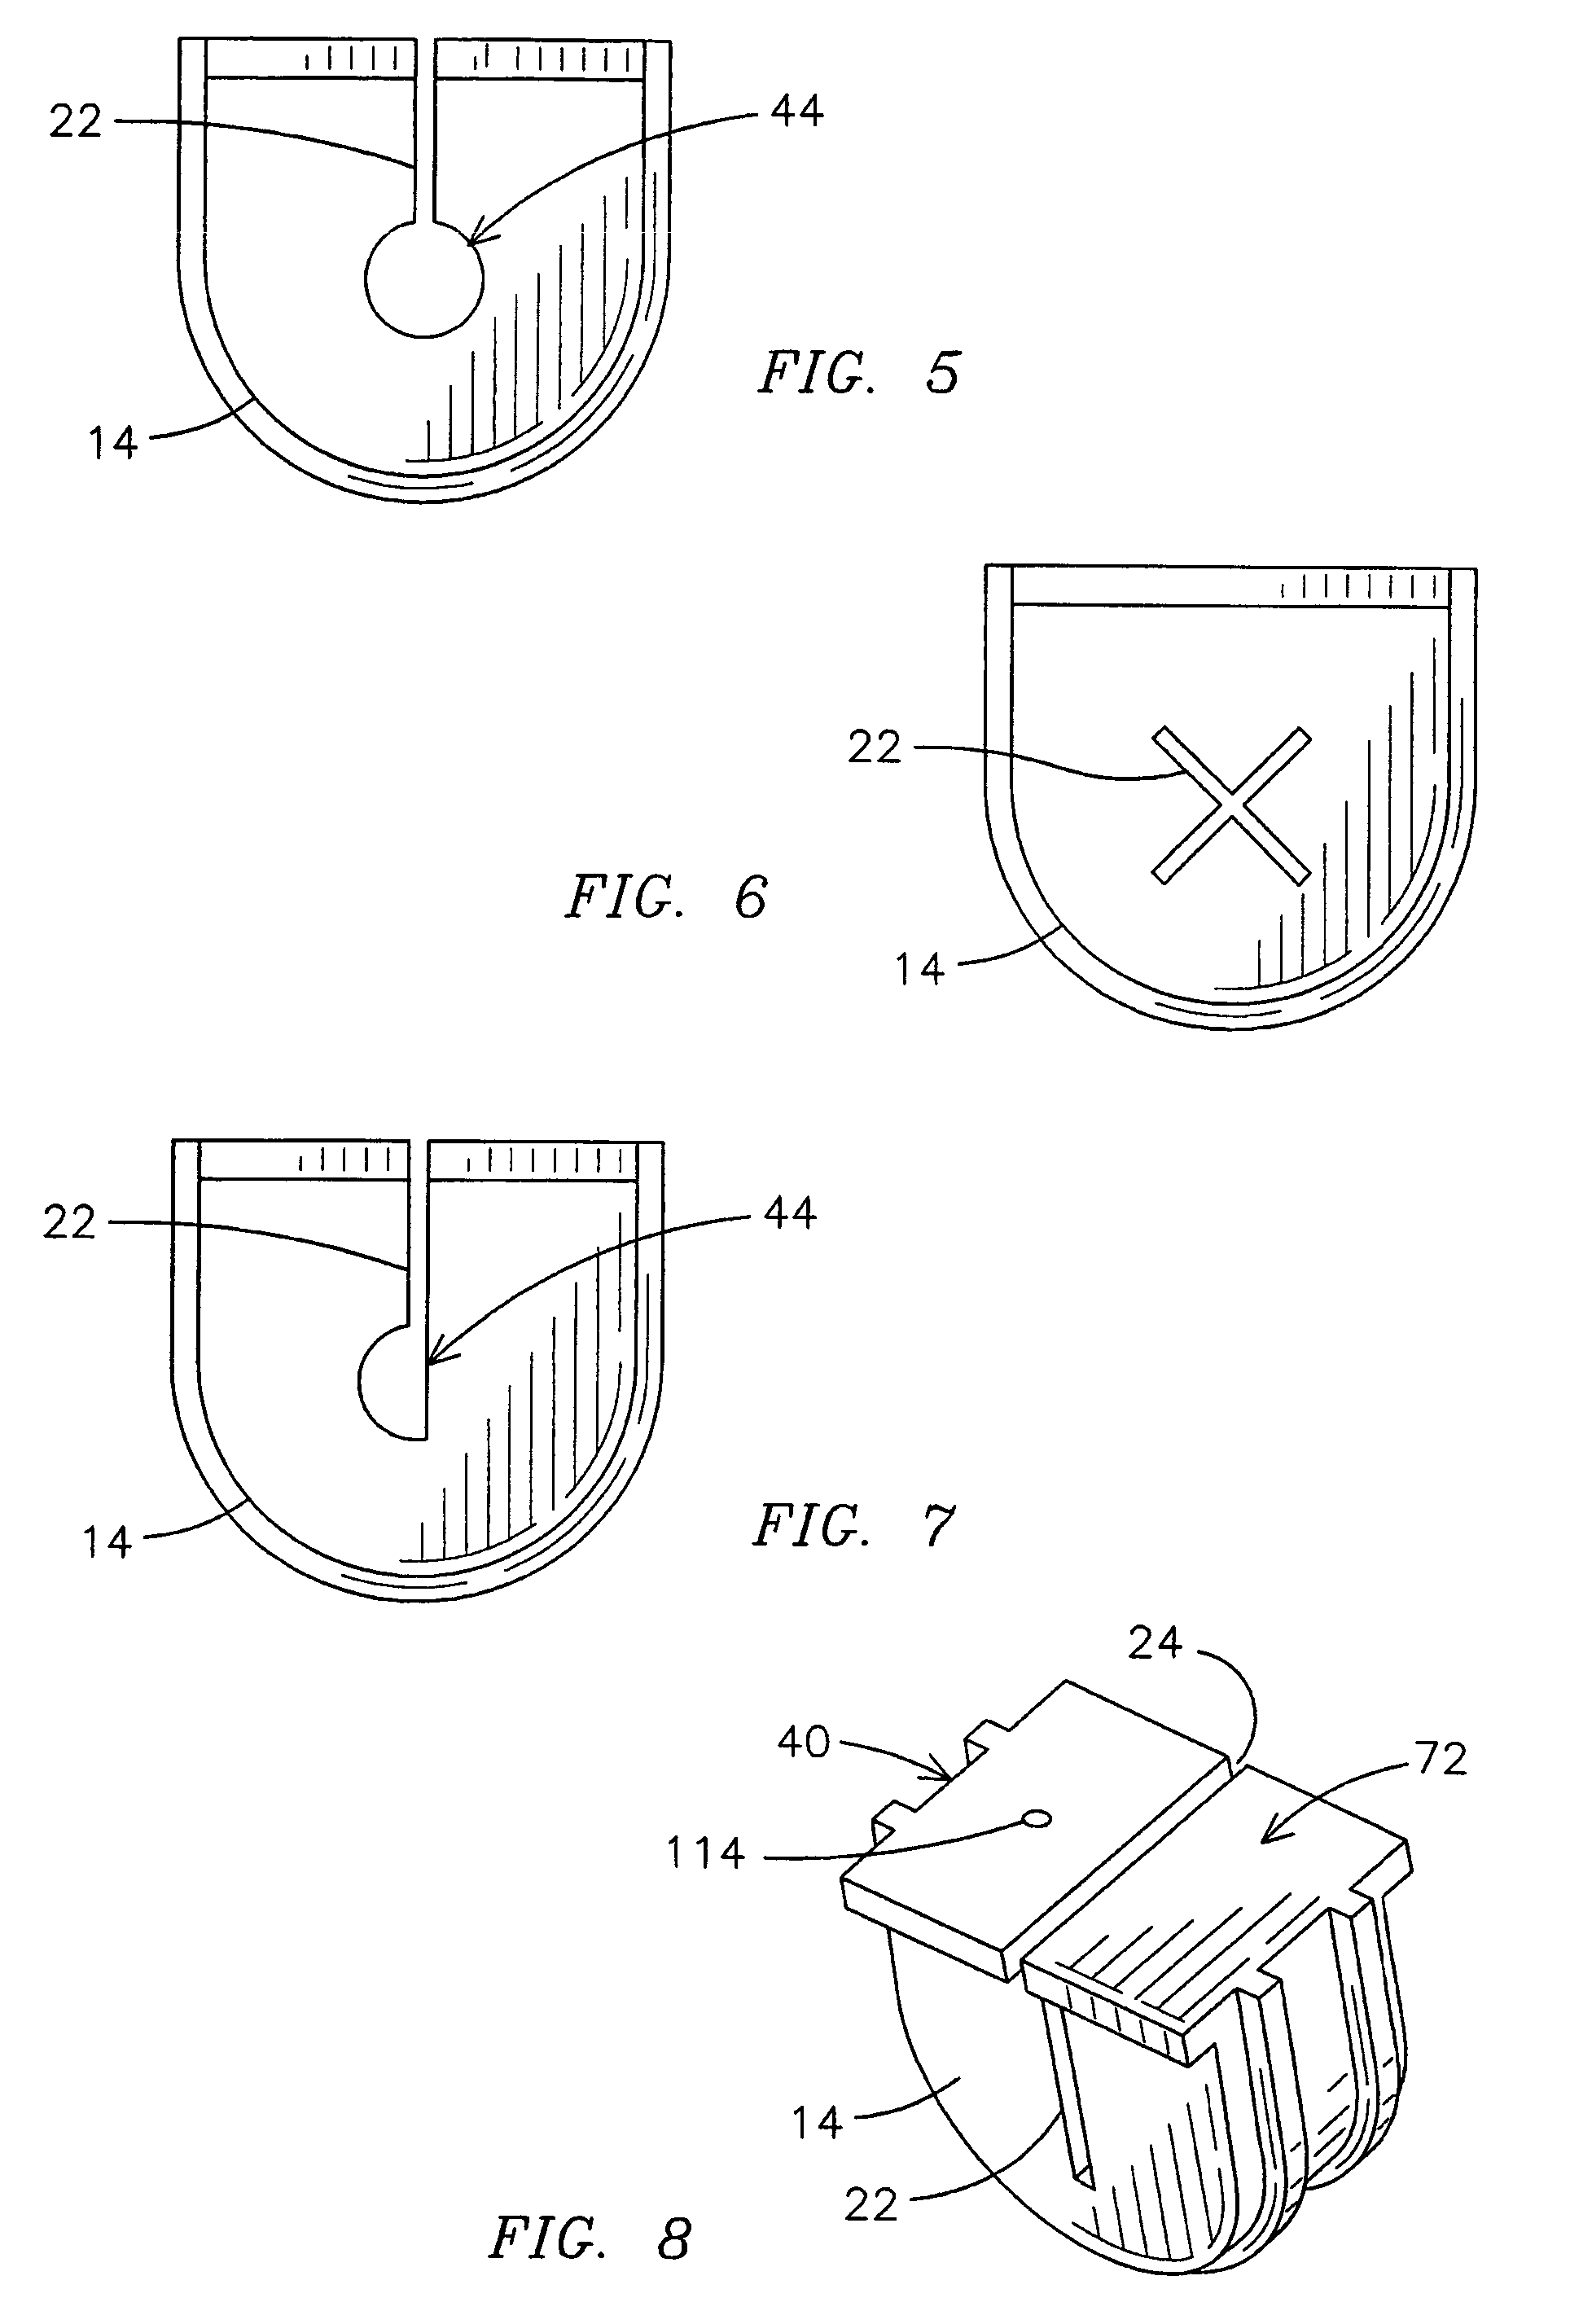 Cable sealing device